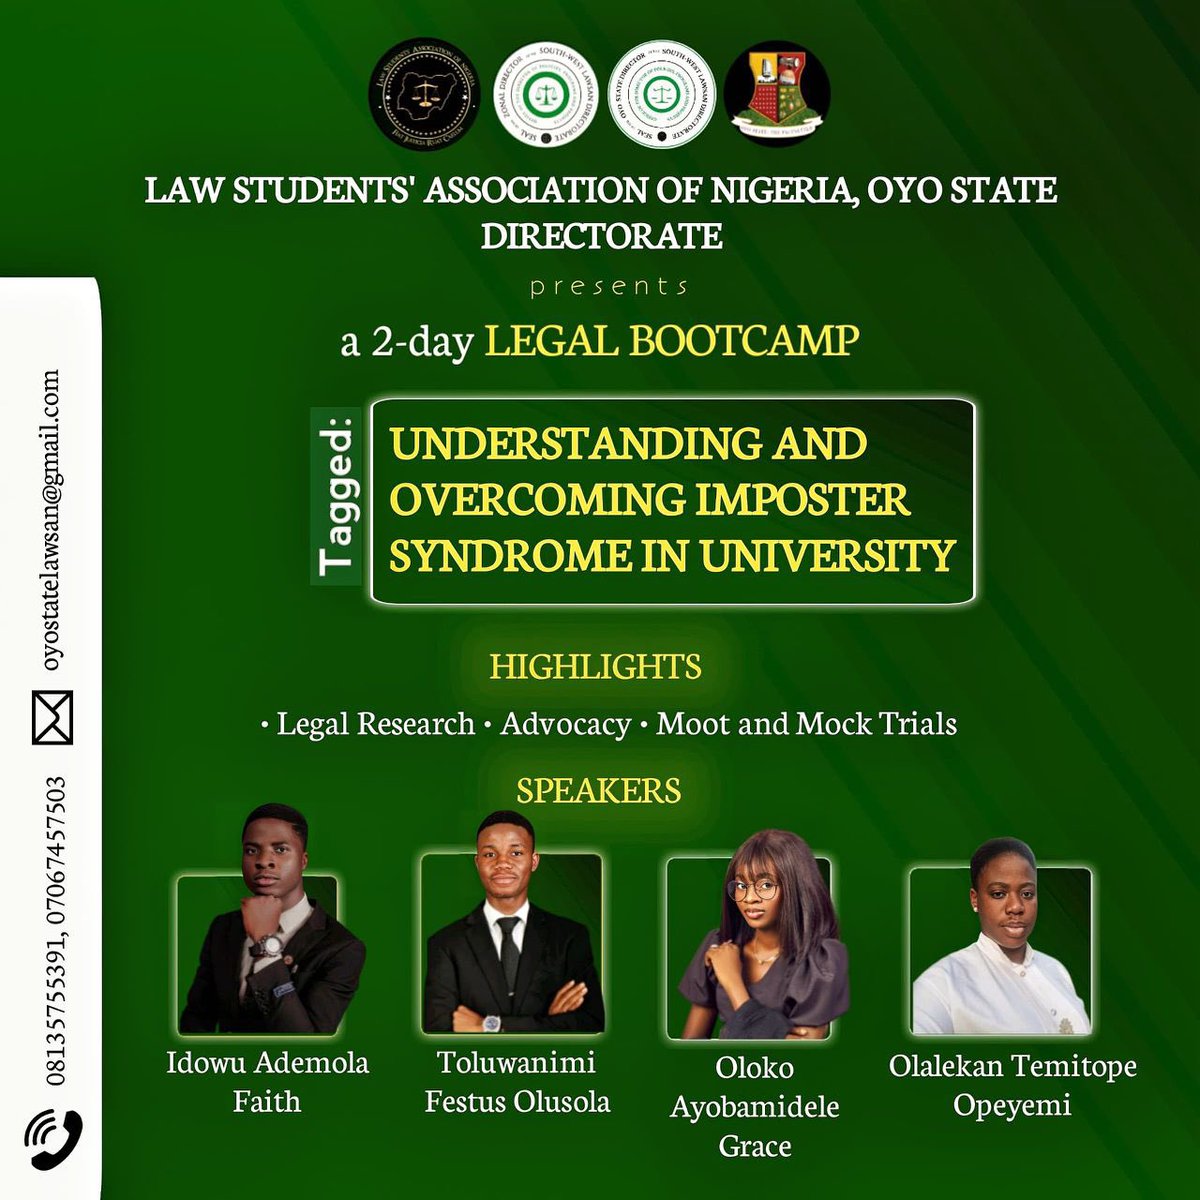 I would be speaking this evening on ‘Advocacy Skills’ for law students.

It would be worth your time. Here is the Meet link; lnkd.in/exf9ii8t

#law #advocacy #publicspeaking